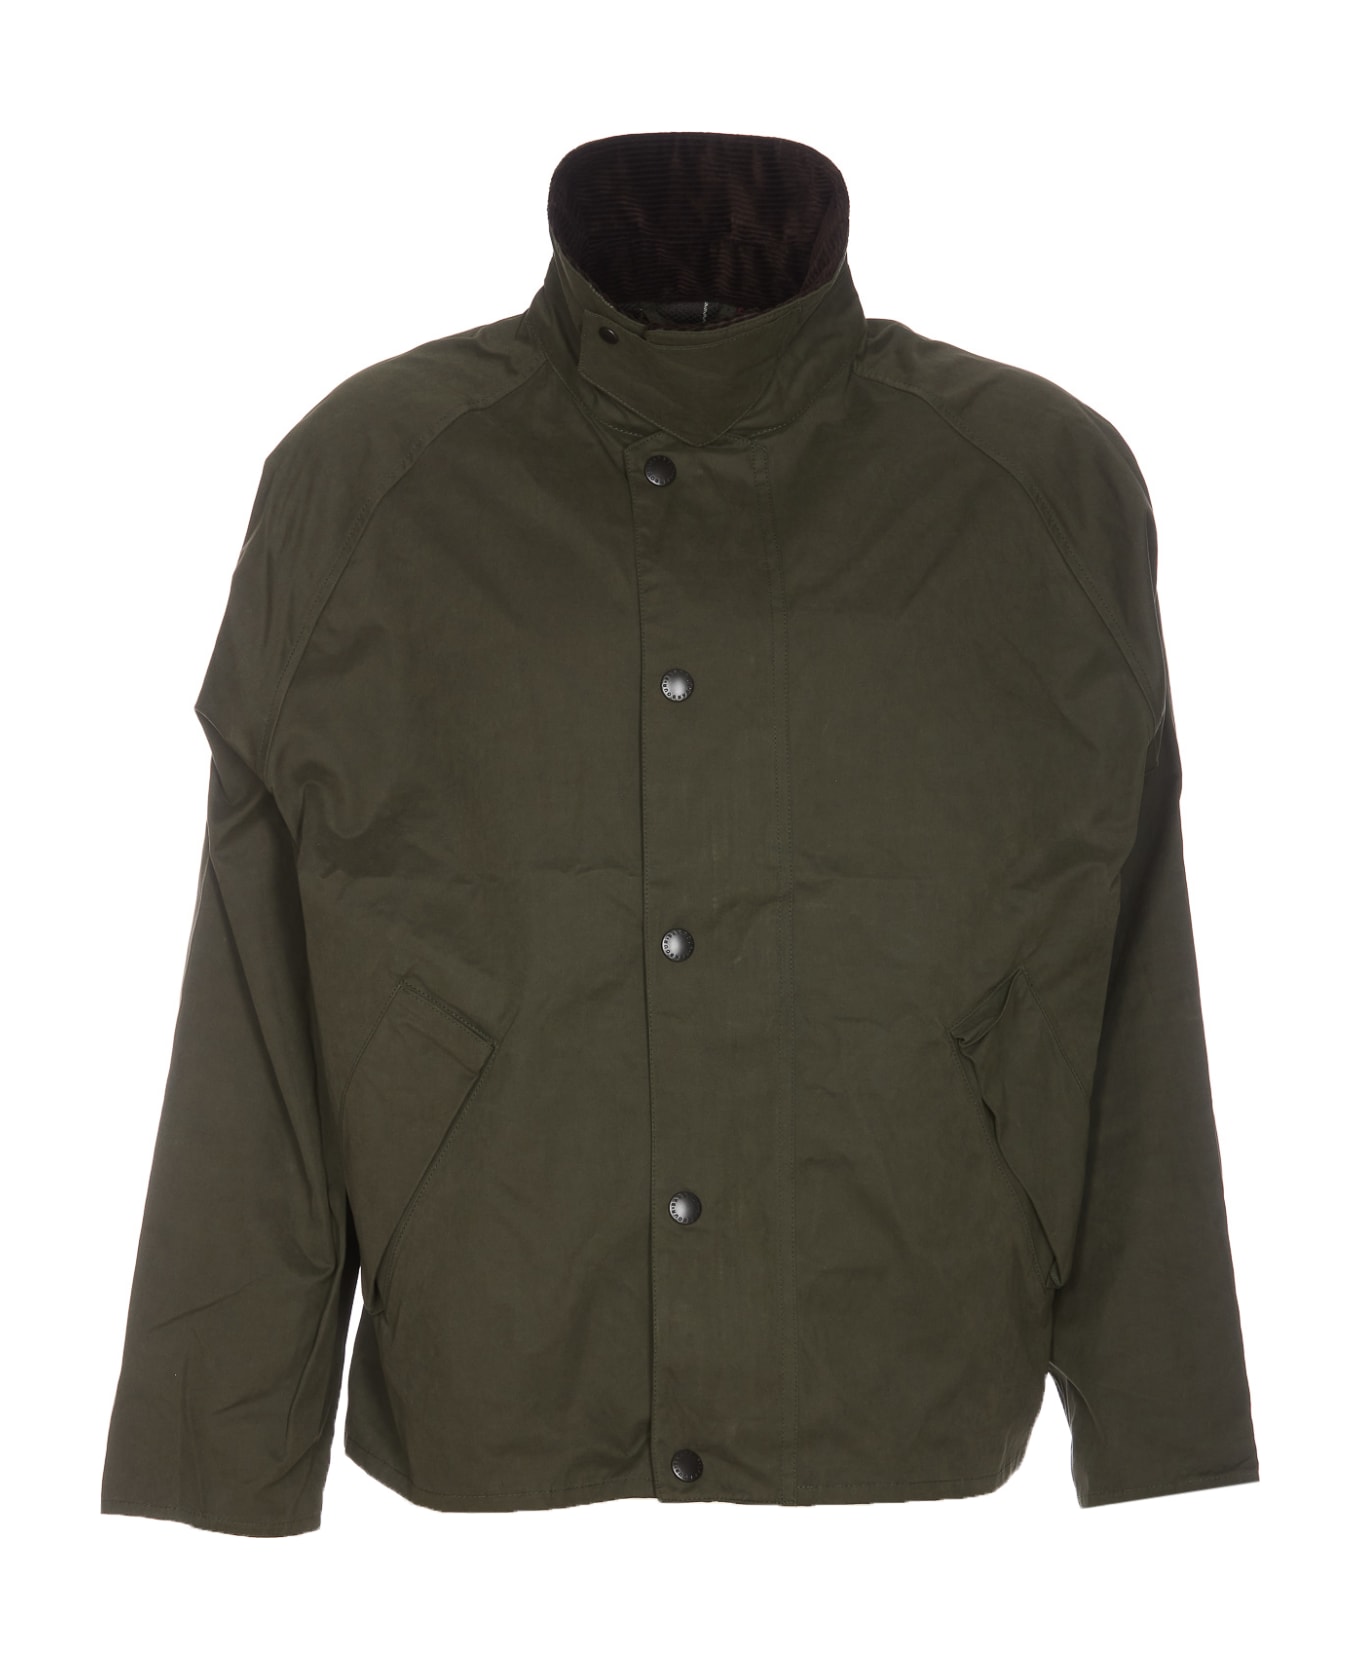 Barbour Os Transport Jacket - Green ブレザー